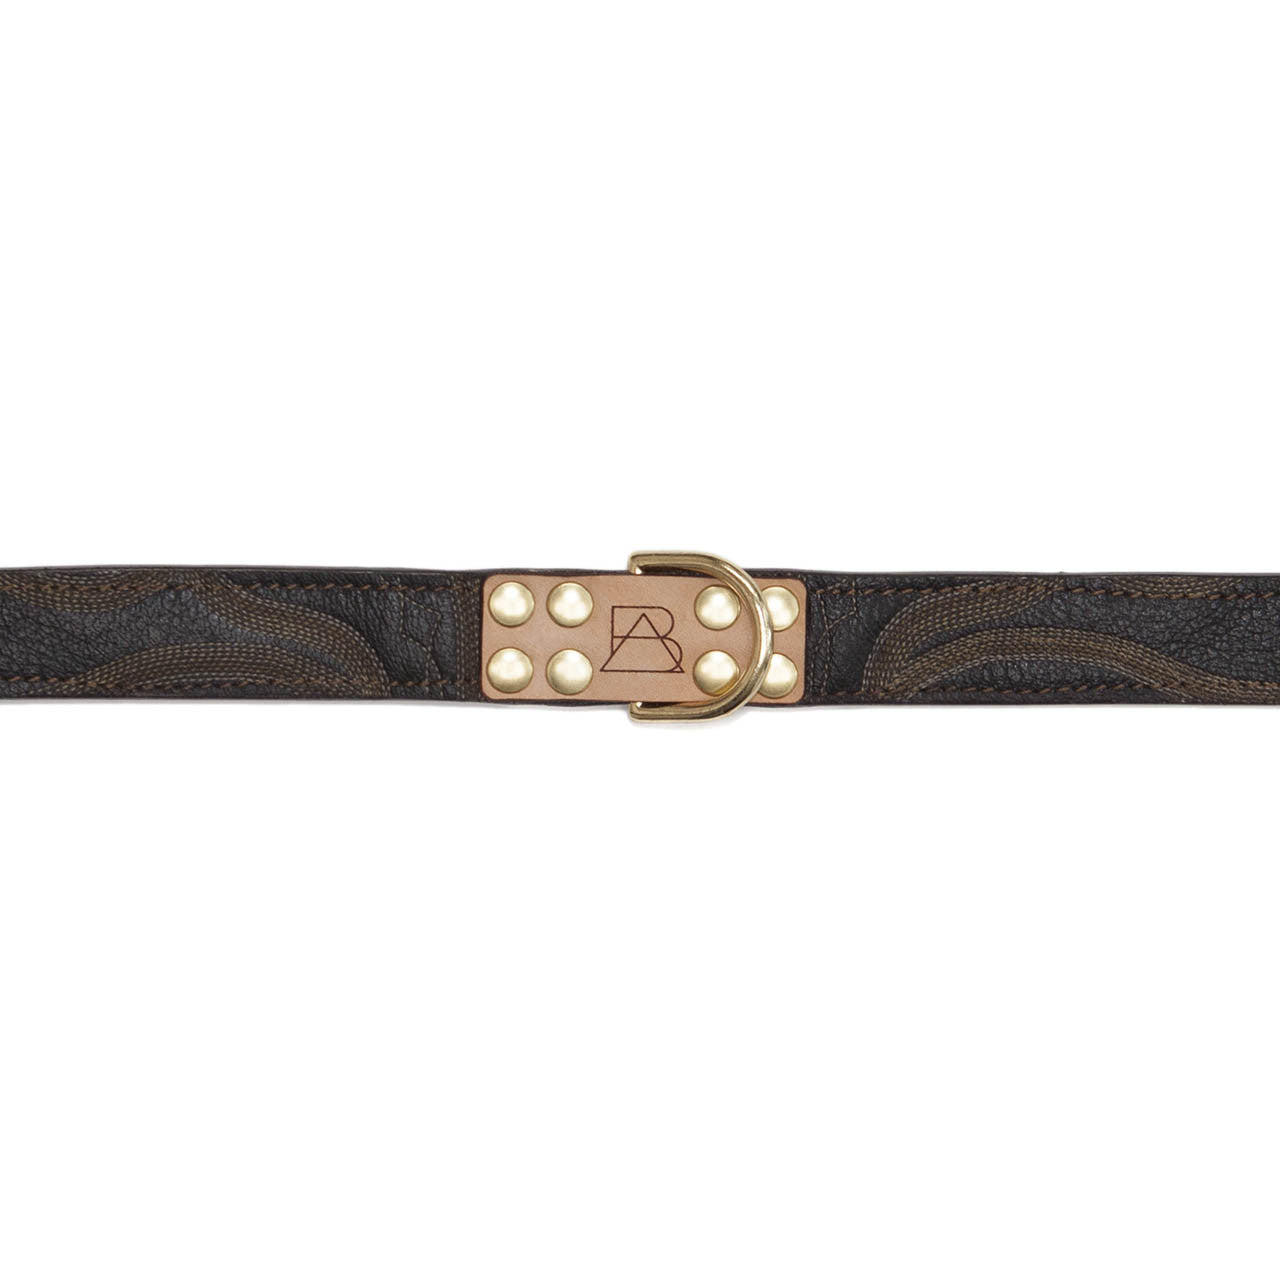 Mahogany Brown Dog Collar with Black Leather + Tan/Light Brown Stitching (tag)